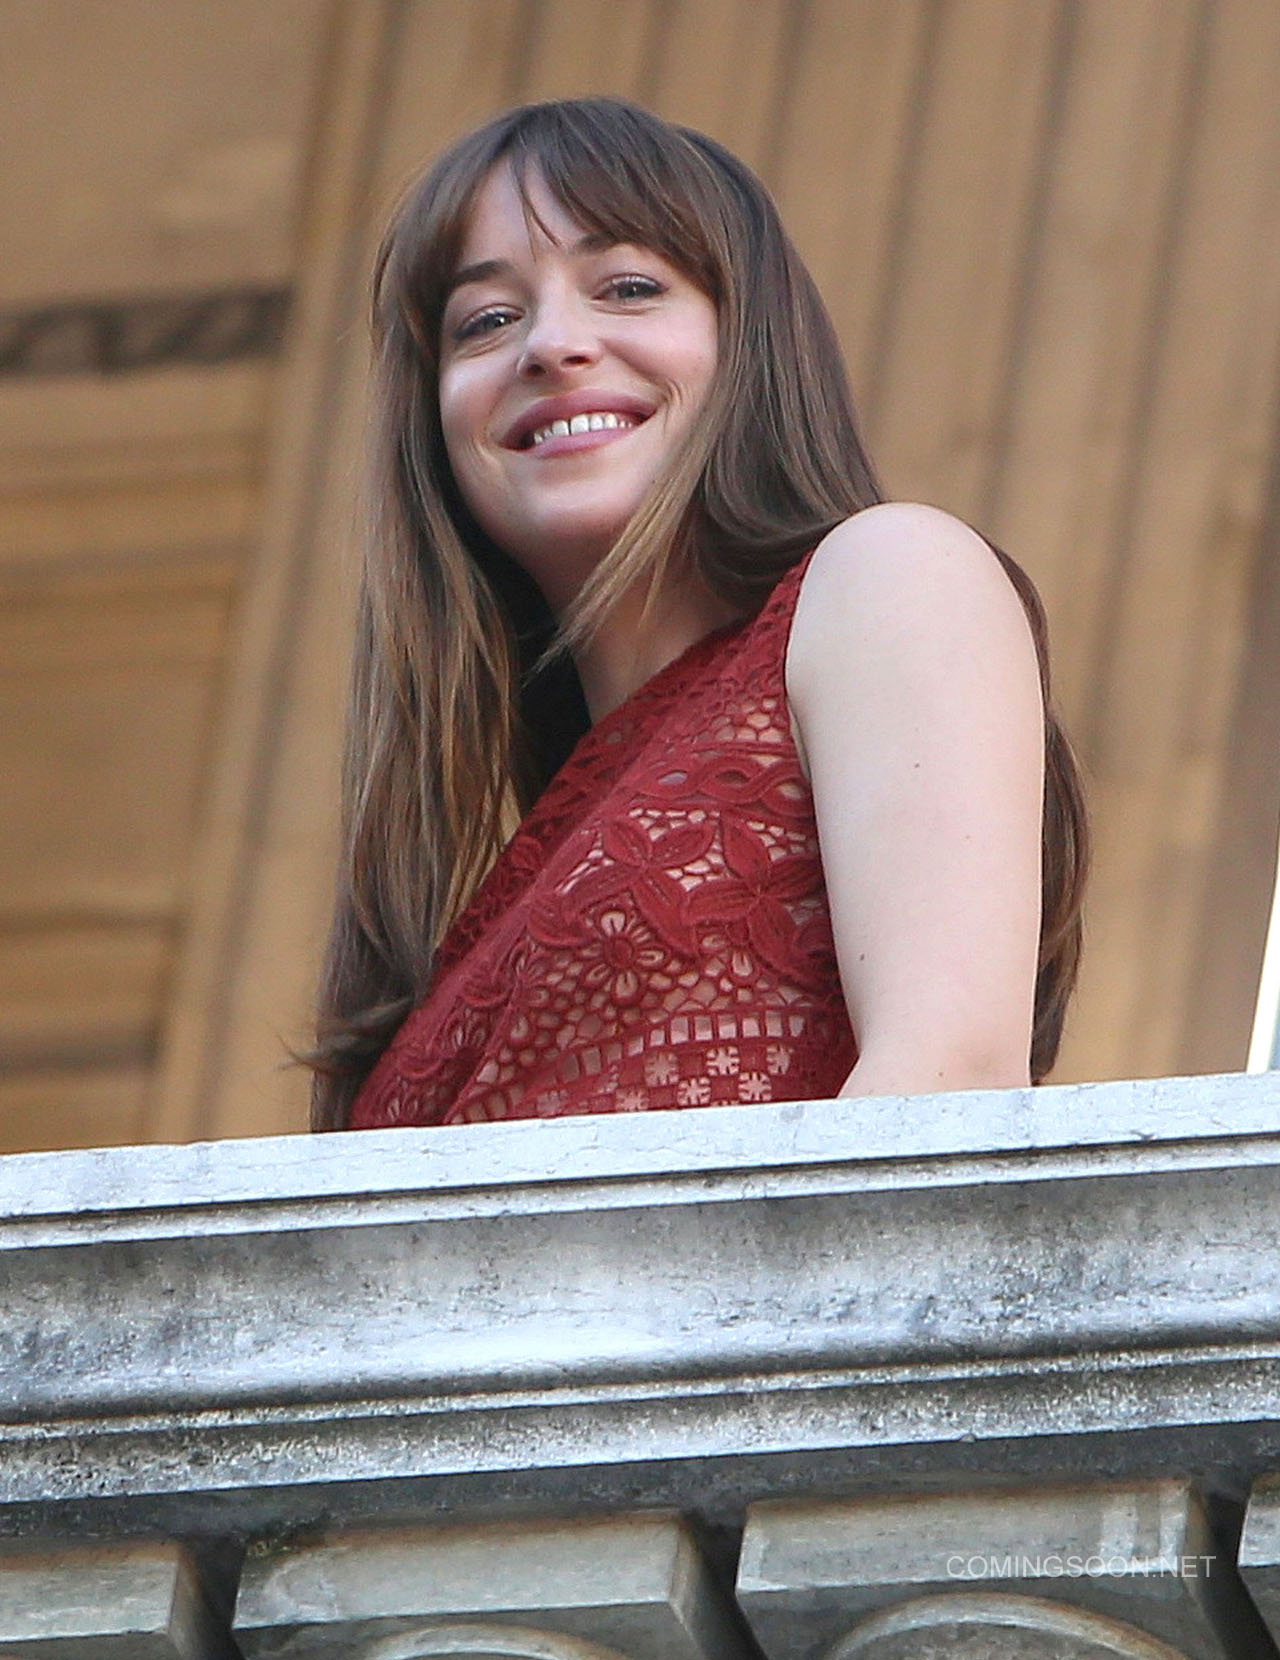 Filming on 'Fifty Shades Darker' takes place at Opera Garnier in Paris Featuring: Dakota Johnson Where: Paris, France When: 18 Jul 2016 Credit: WENN.com **Not available for publication in France, Belgium, Spain, Italy**